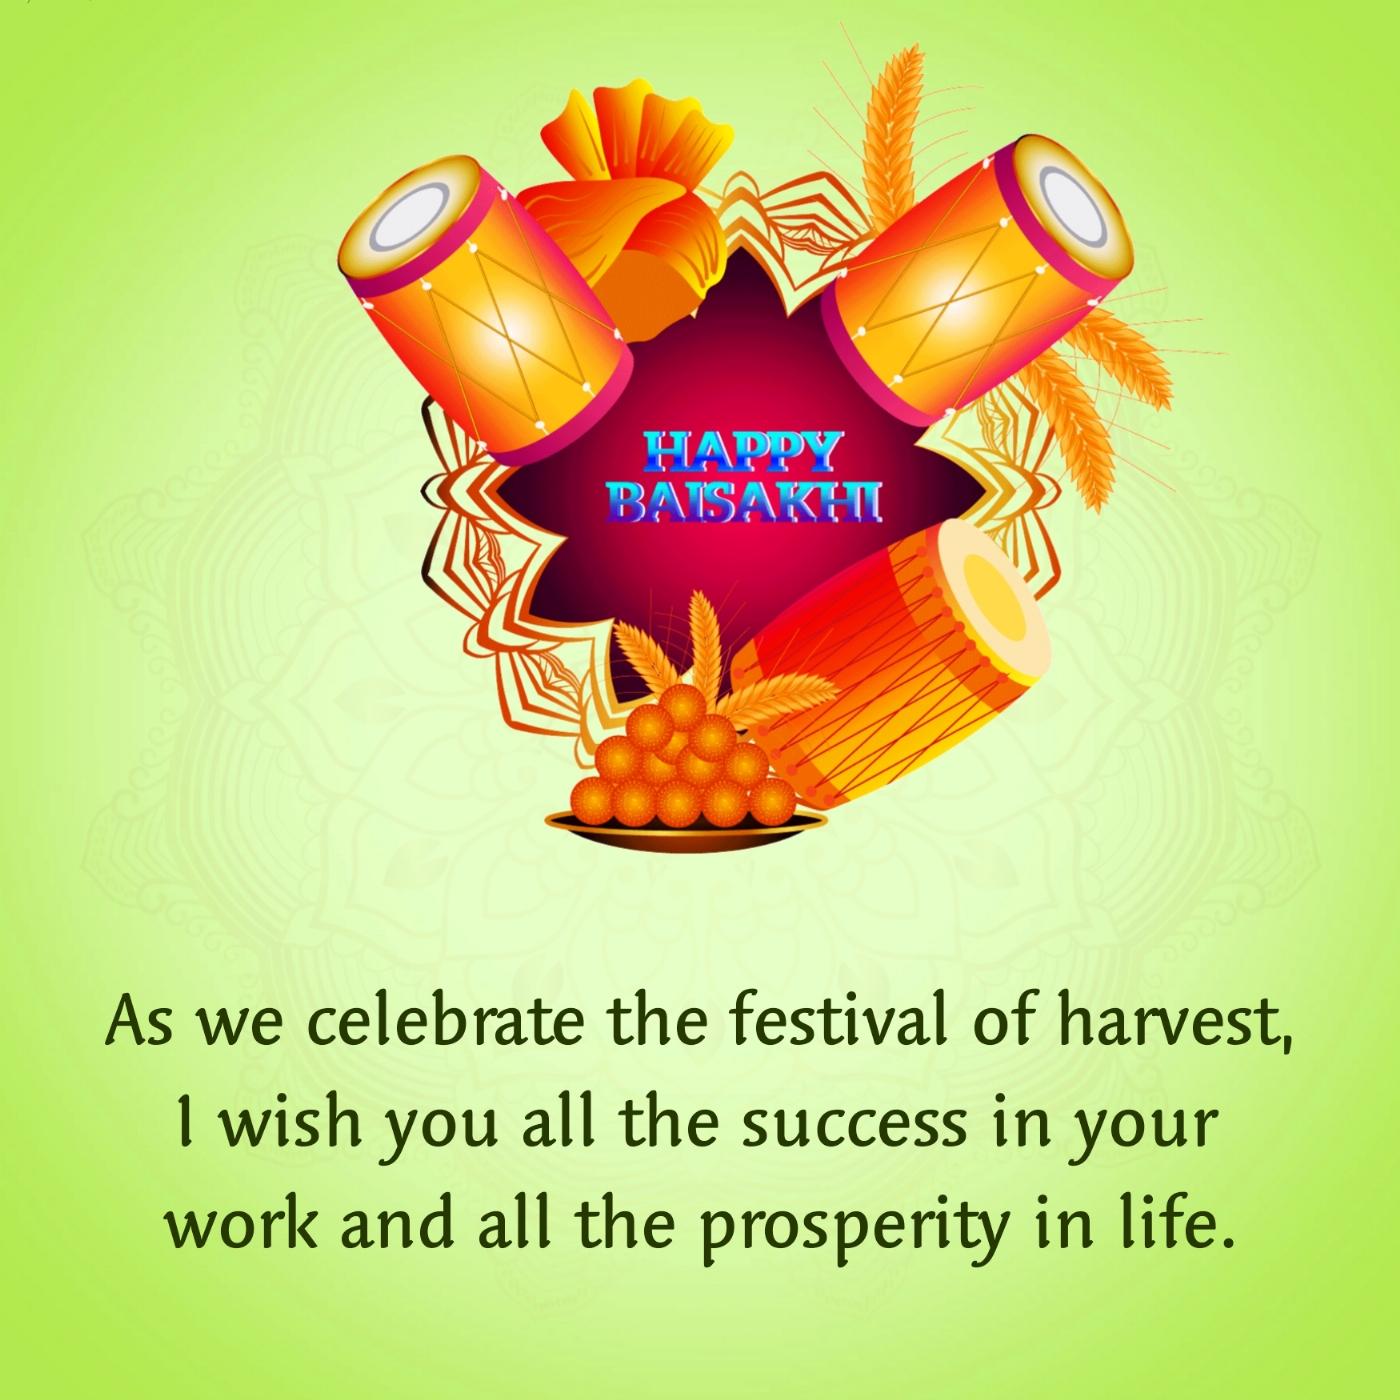 As we celebrate the festival of harvest I wish you all the success